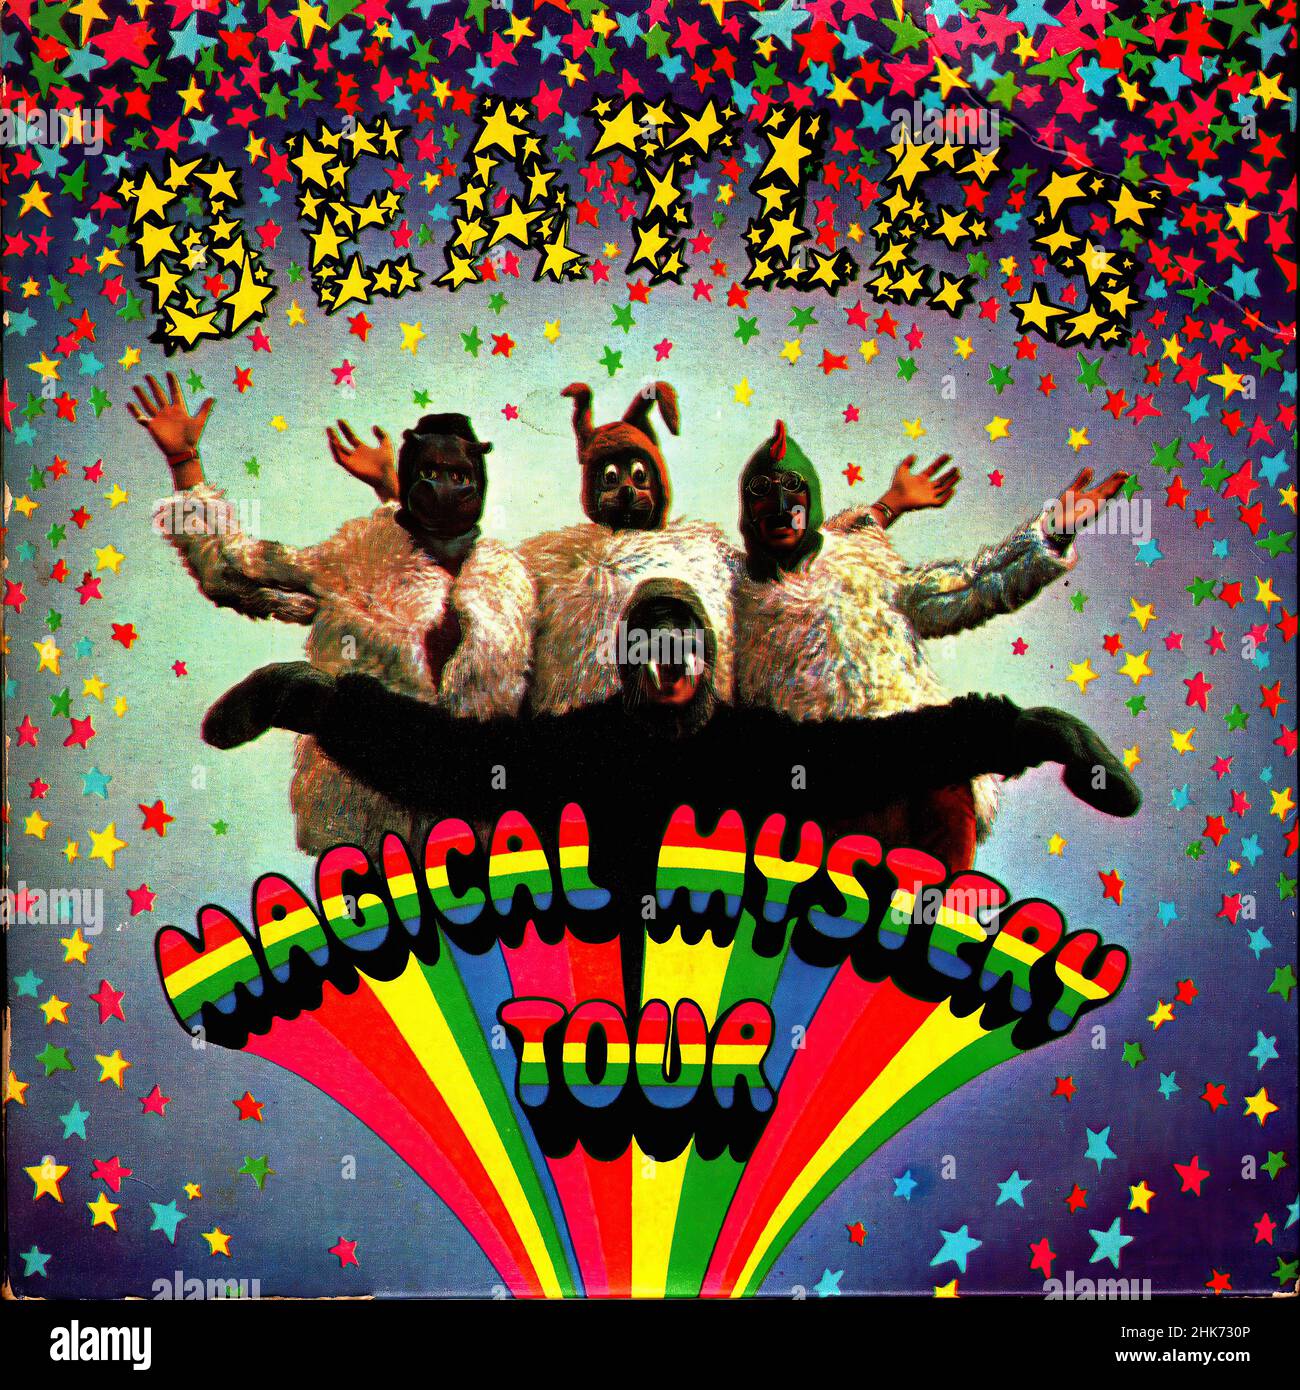 Vintage vinyl record cover - Beatles, The - Magical Mystery Tour - Double EP - UK - 1967 Stock Photo